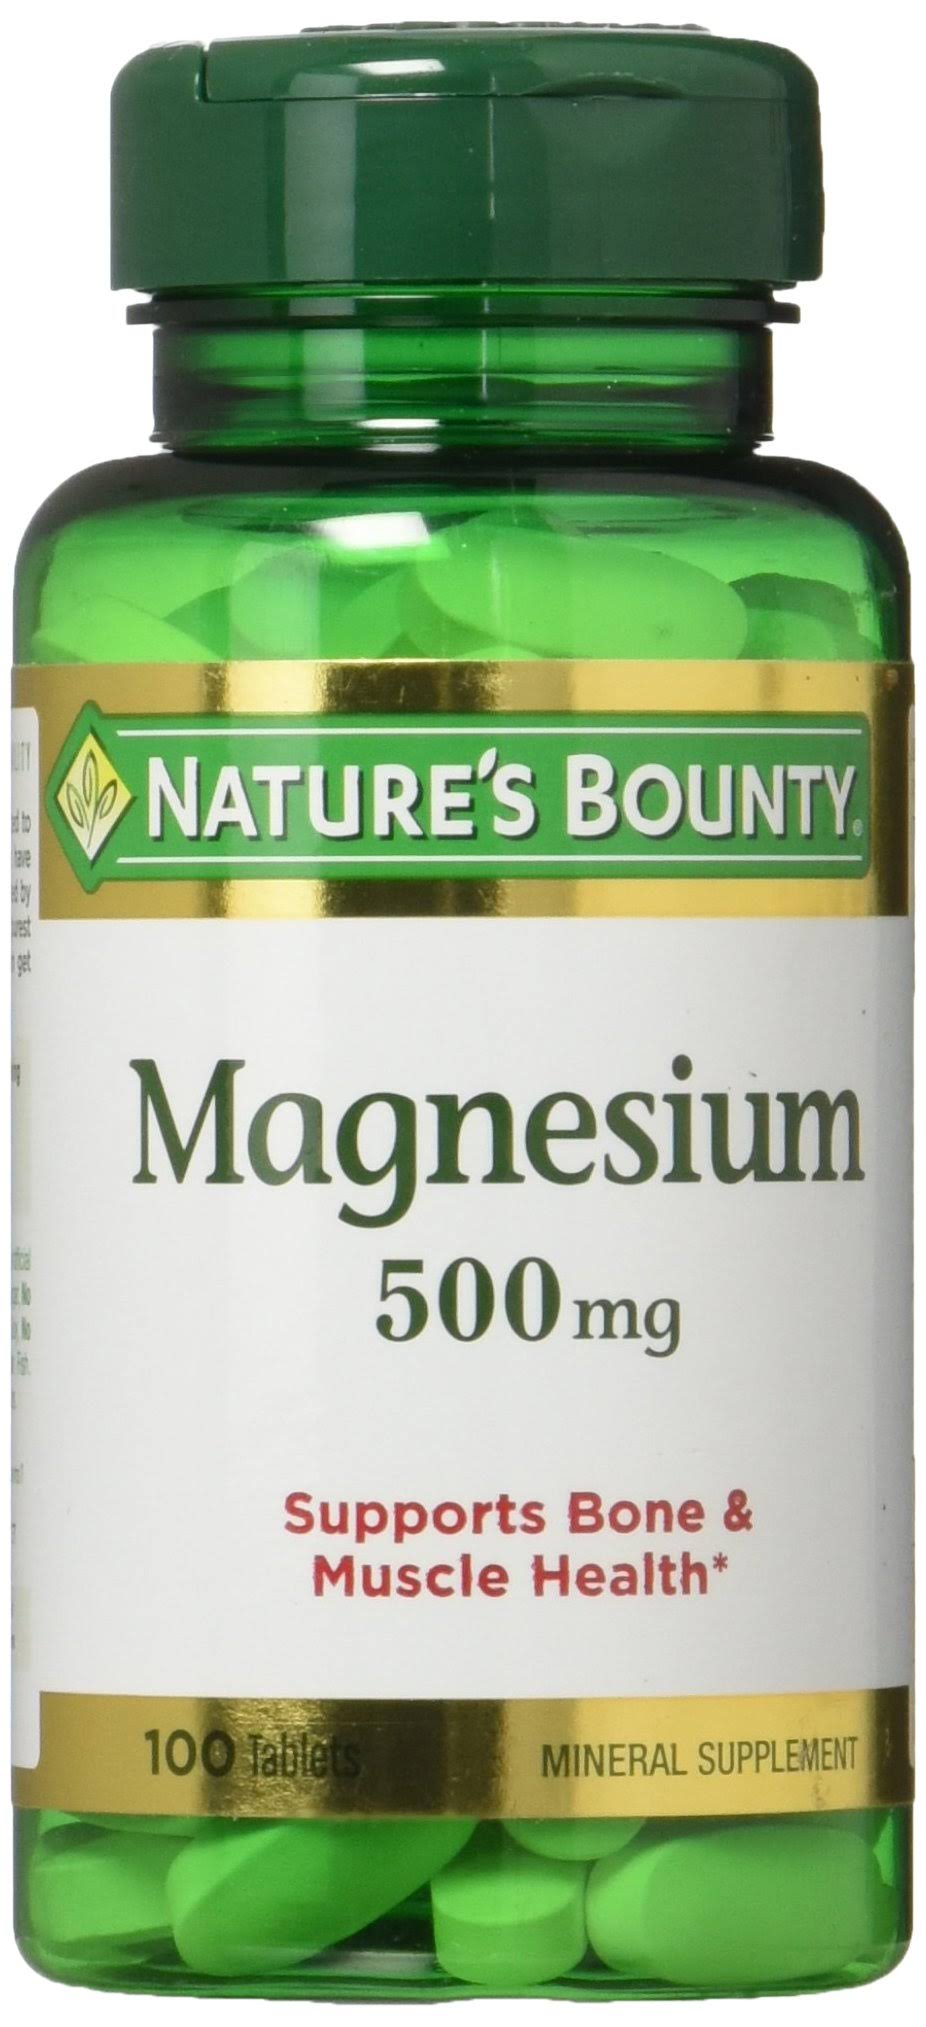 Nature's Bounty Magnesium Mineral Supplement - 500mg, 100 Pack